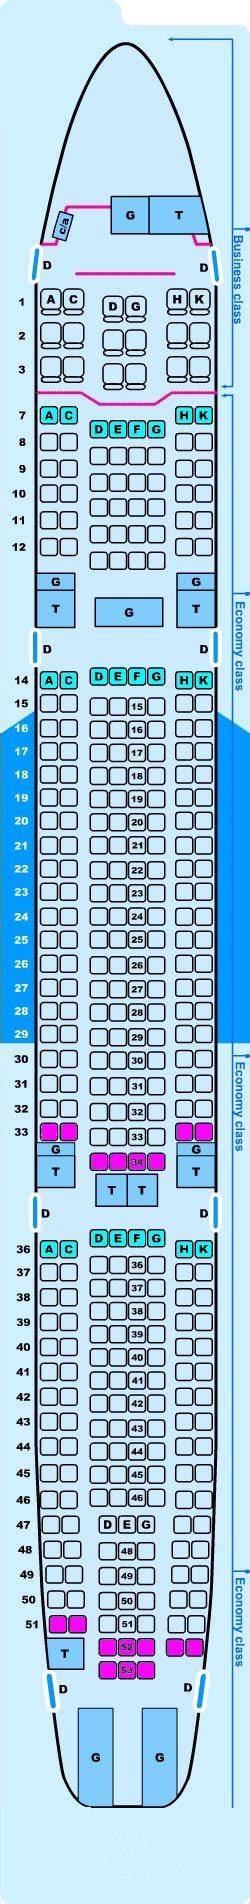 United Airlines Airbus A330 300 Seating Chart My Bios